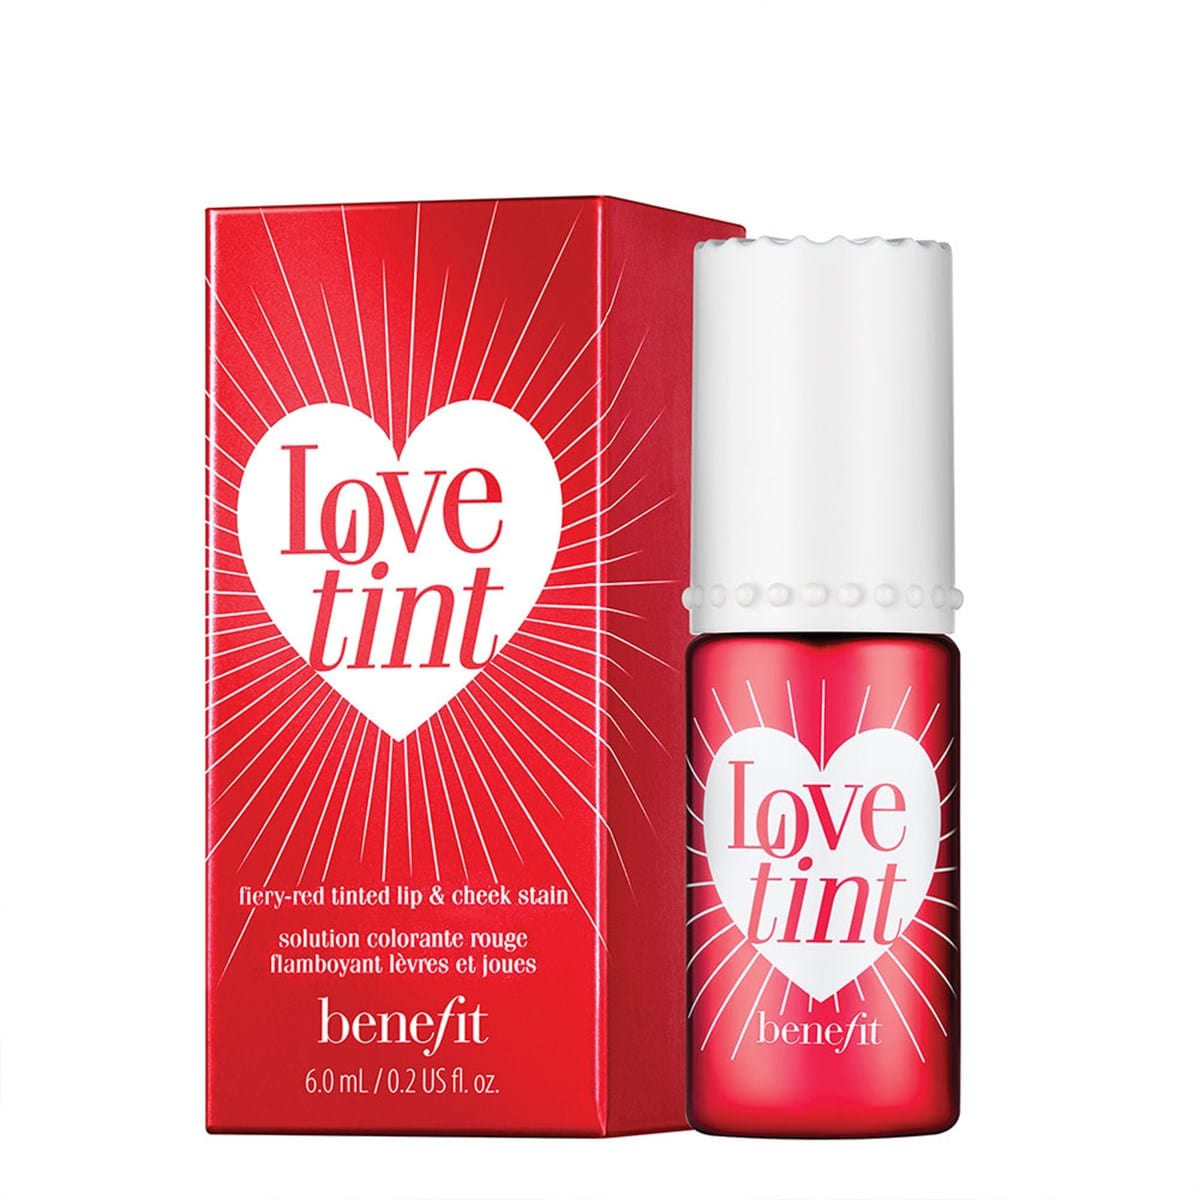 Lovetint Cheek & Lip Stain Fiery-red tinted lip & cheek stain by Benefit